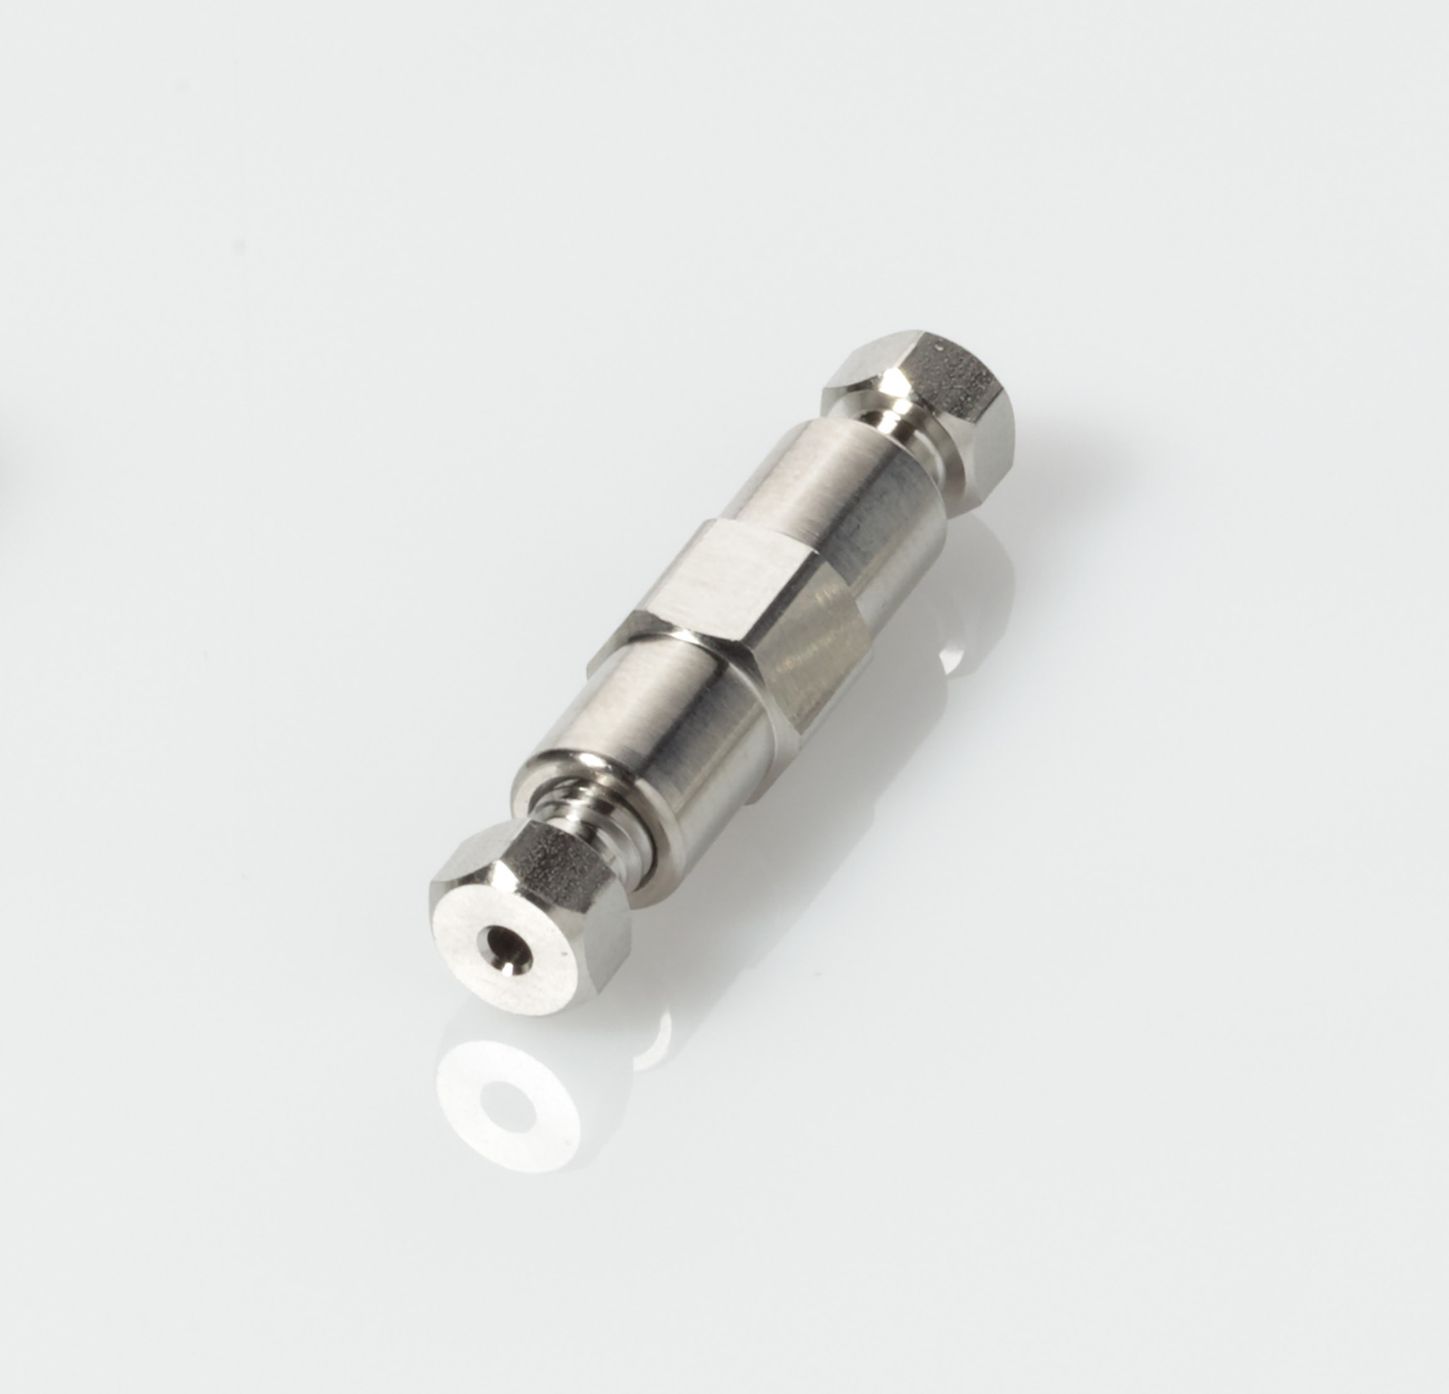 Connector Union ZDV Stainless Steel 0.020 (0.50mm) Thru-Hole for 1/16" OD Tubing (Union + Fittings)